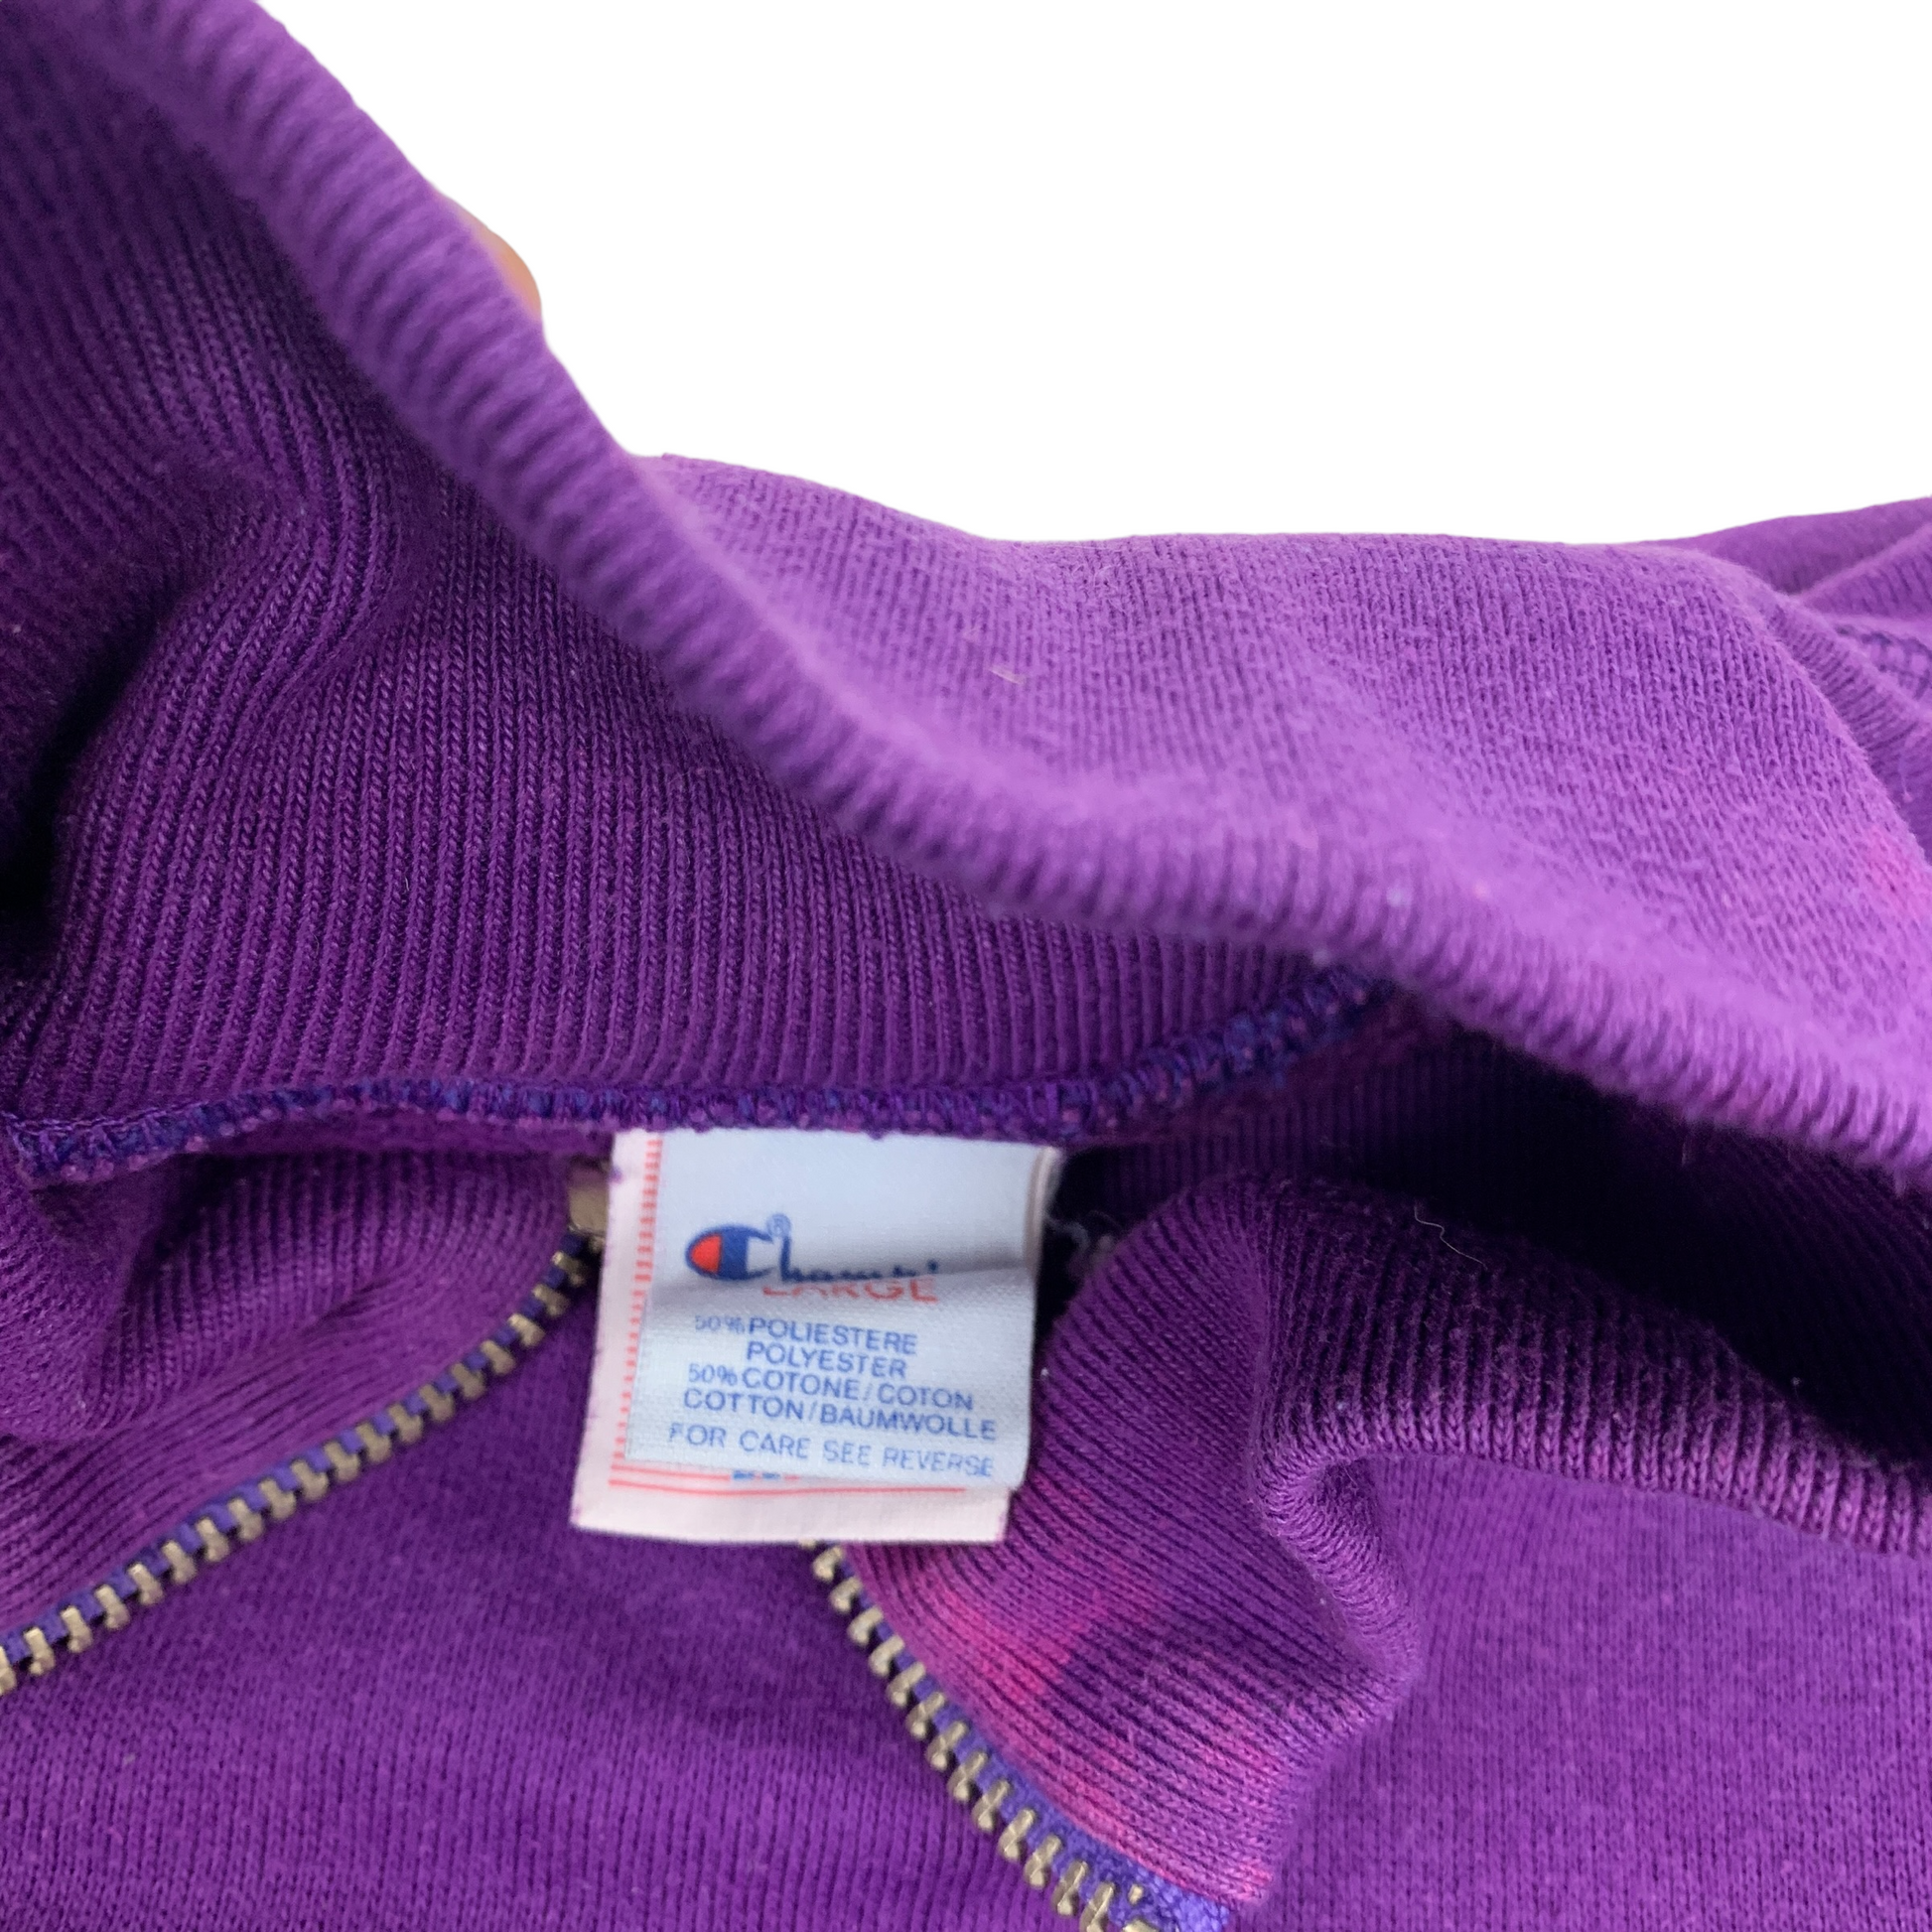 Vintage Champion Sweater-Sweaters-pufferseason-secondhand-shop-austria-vintage-puffer-down-coat-sustainable